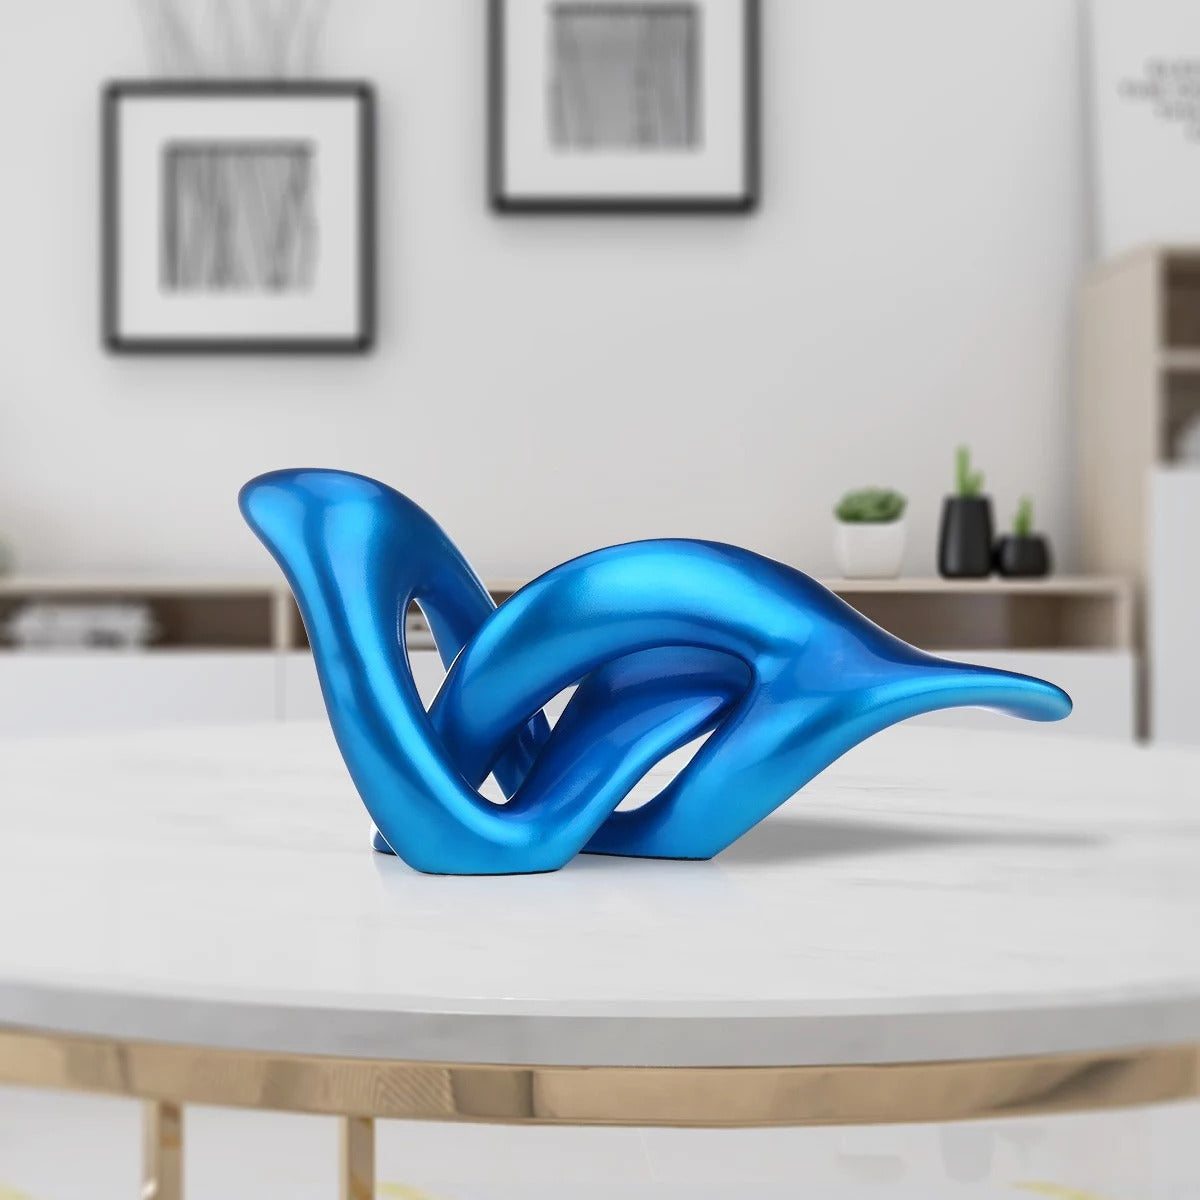 Journey to the Blue Beginning to Abstract Sculpture for Home Accessories in the Bedroom or Living Room Decor